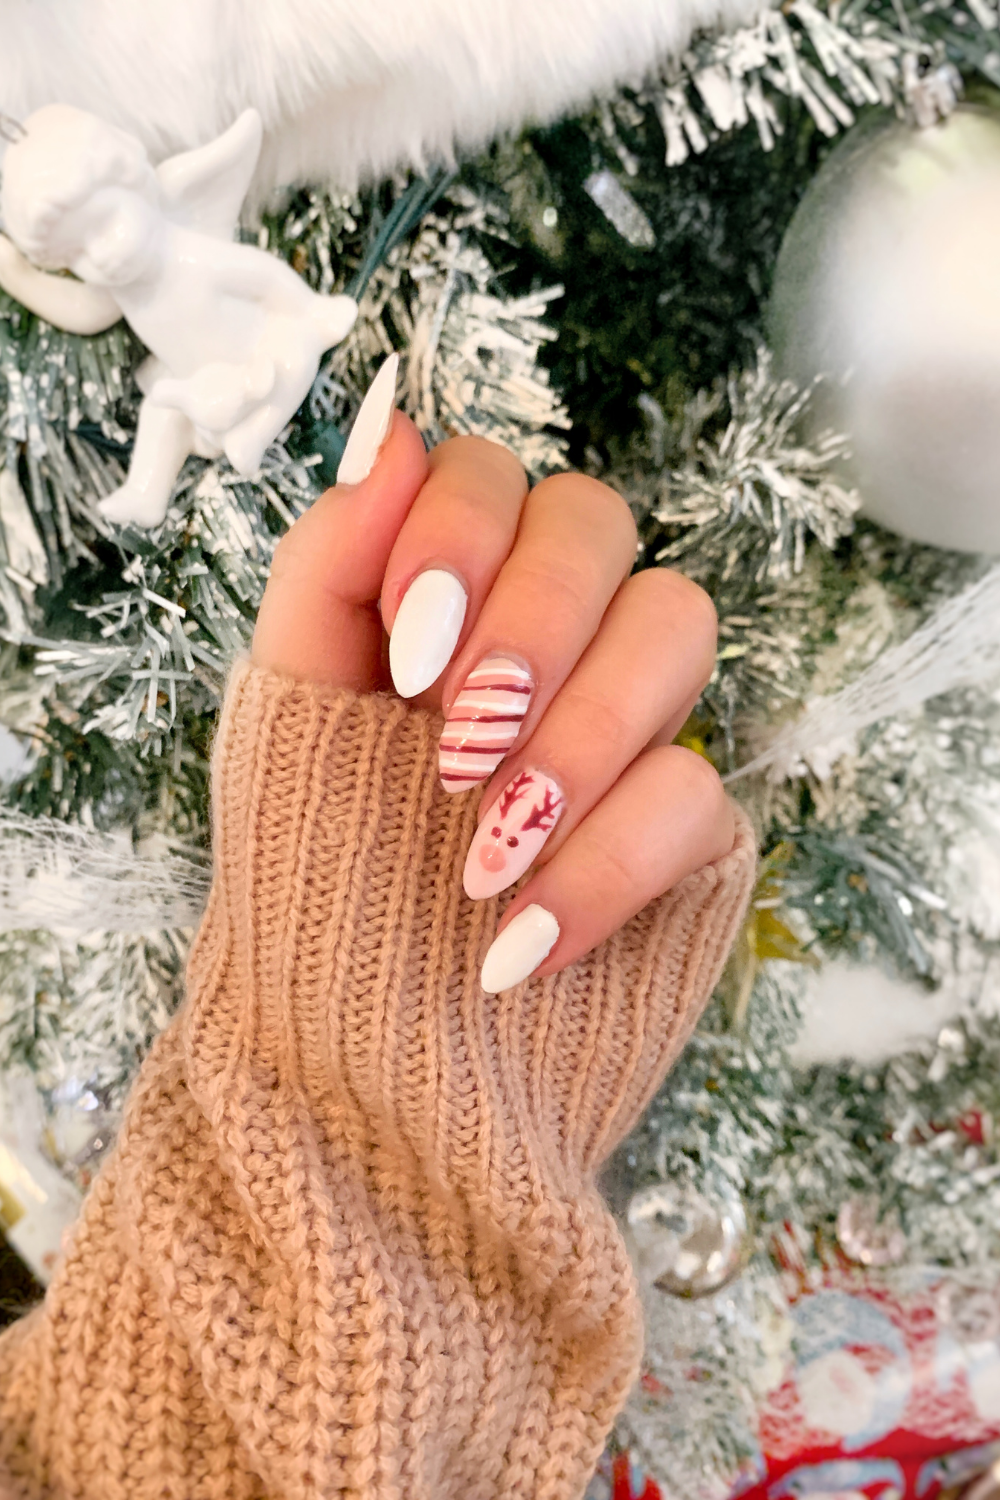 Oval & Almond-Shaped Nails | Doonails